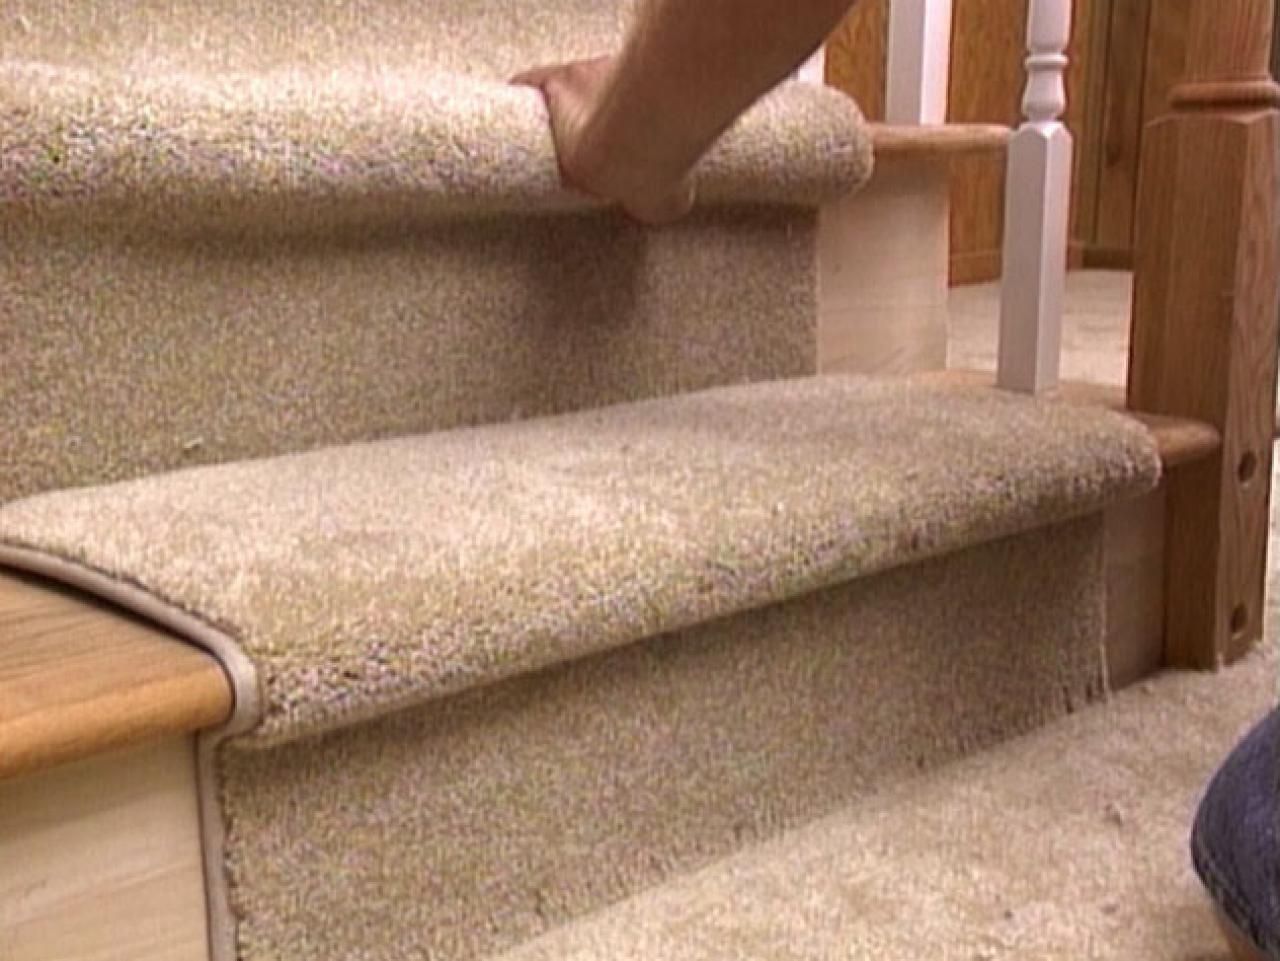 How To Install A Carpet Runner On Stairs Hgtv With Regard To Carpets Runners For Stairs (View 14 of 20)